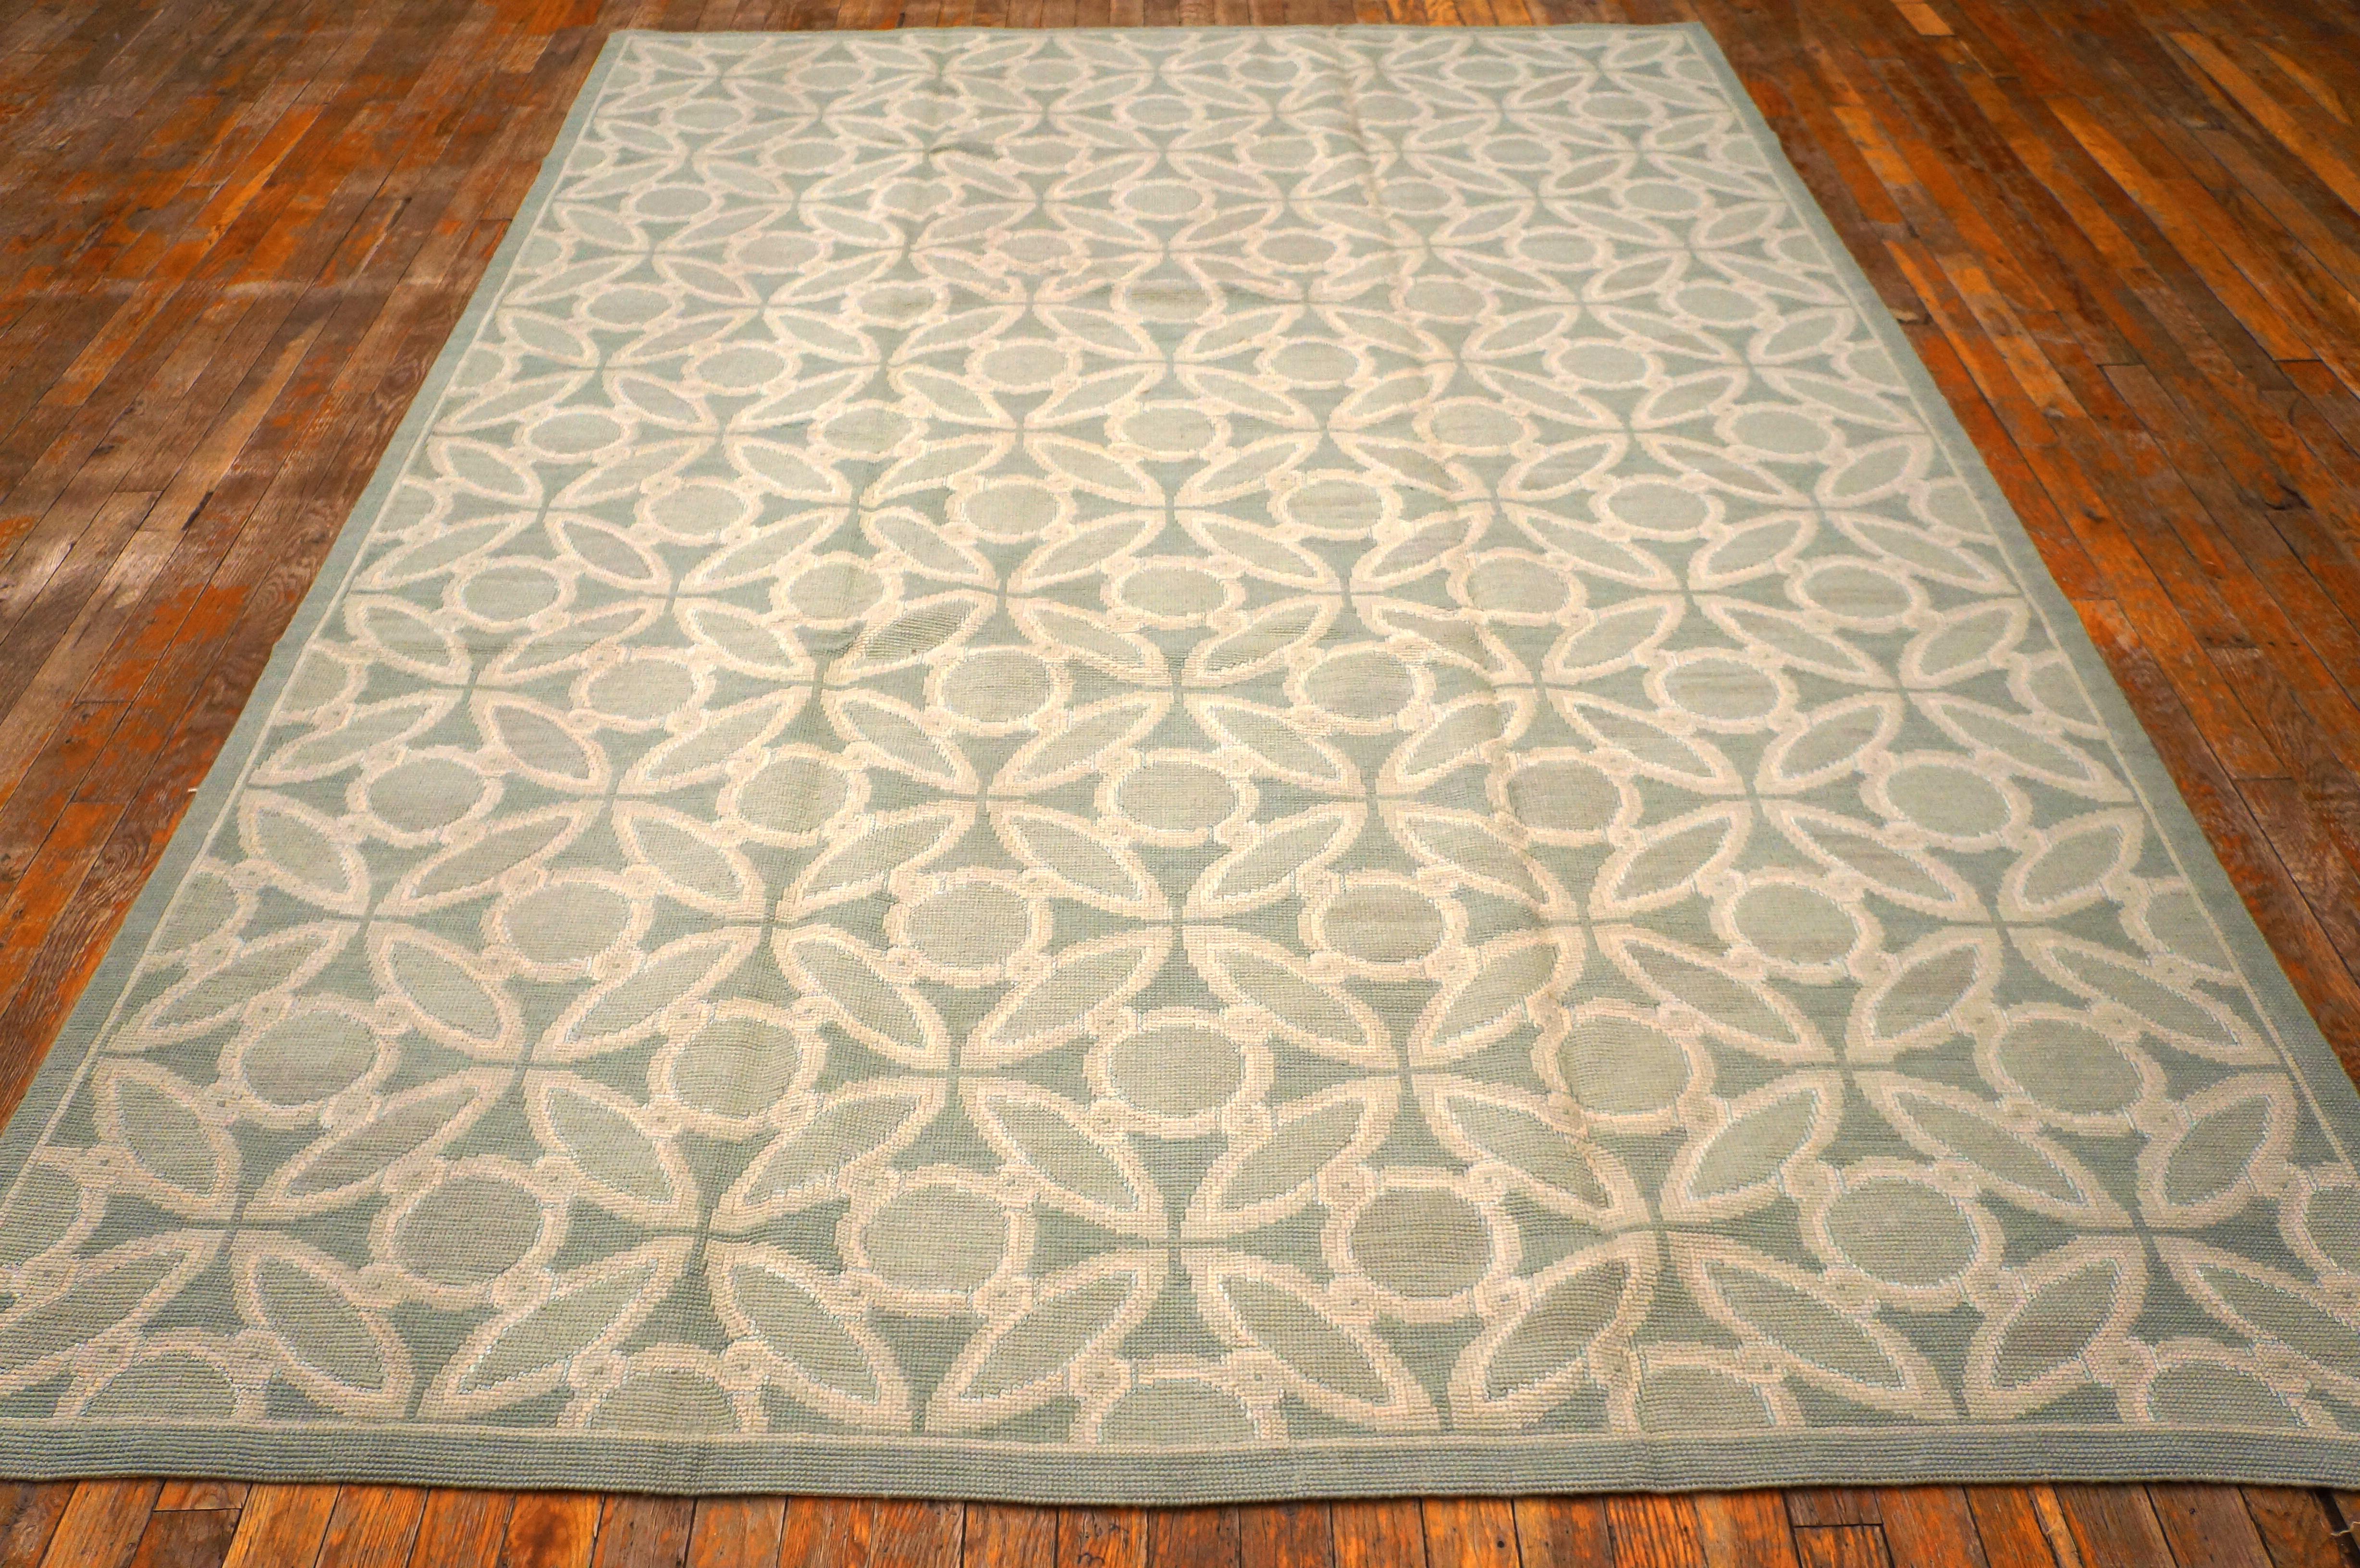 Contemporary Handwoven Wool Needlepoint Flat Weave Carpet With Silk Highlights ( 9' x 12' 275 x 365 cm)